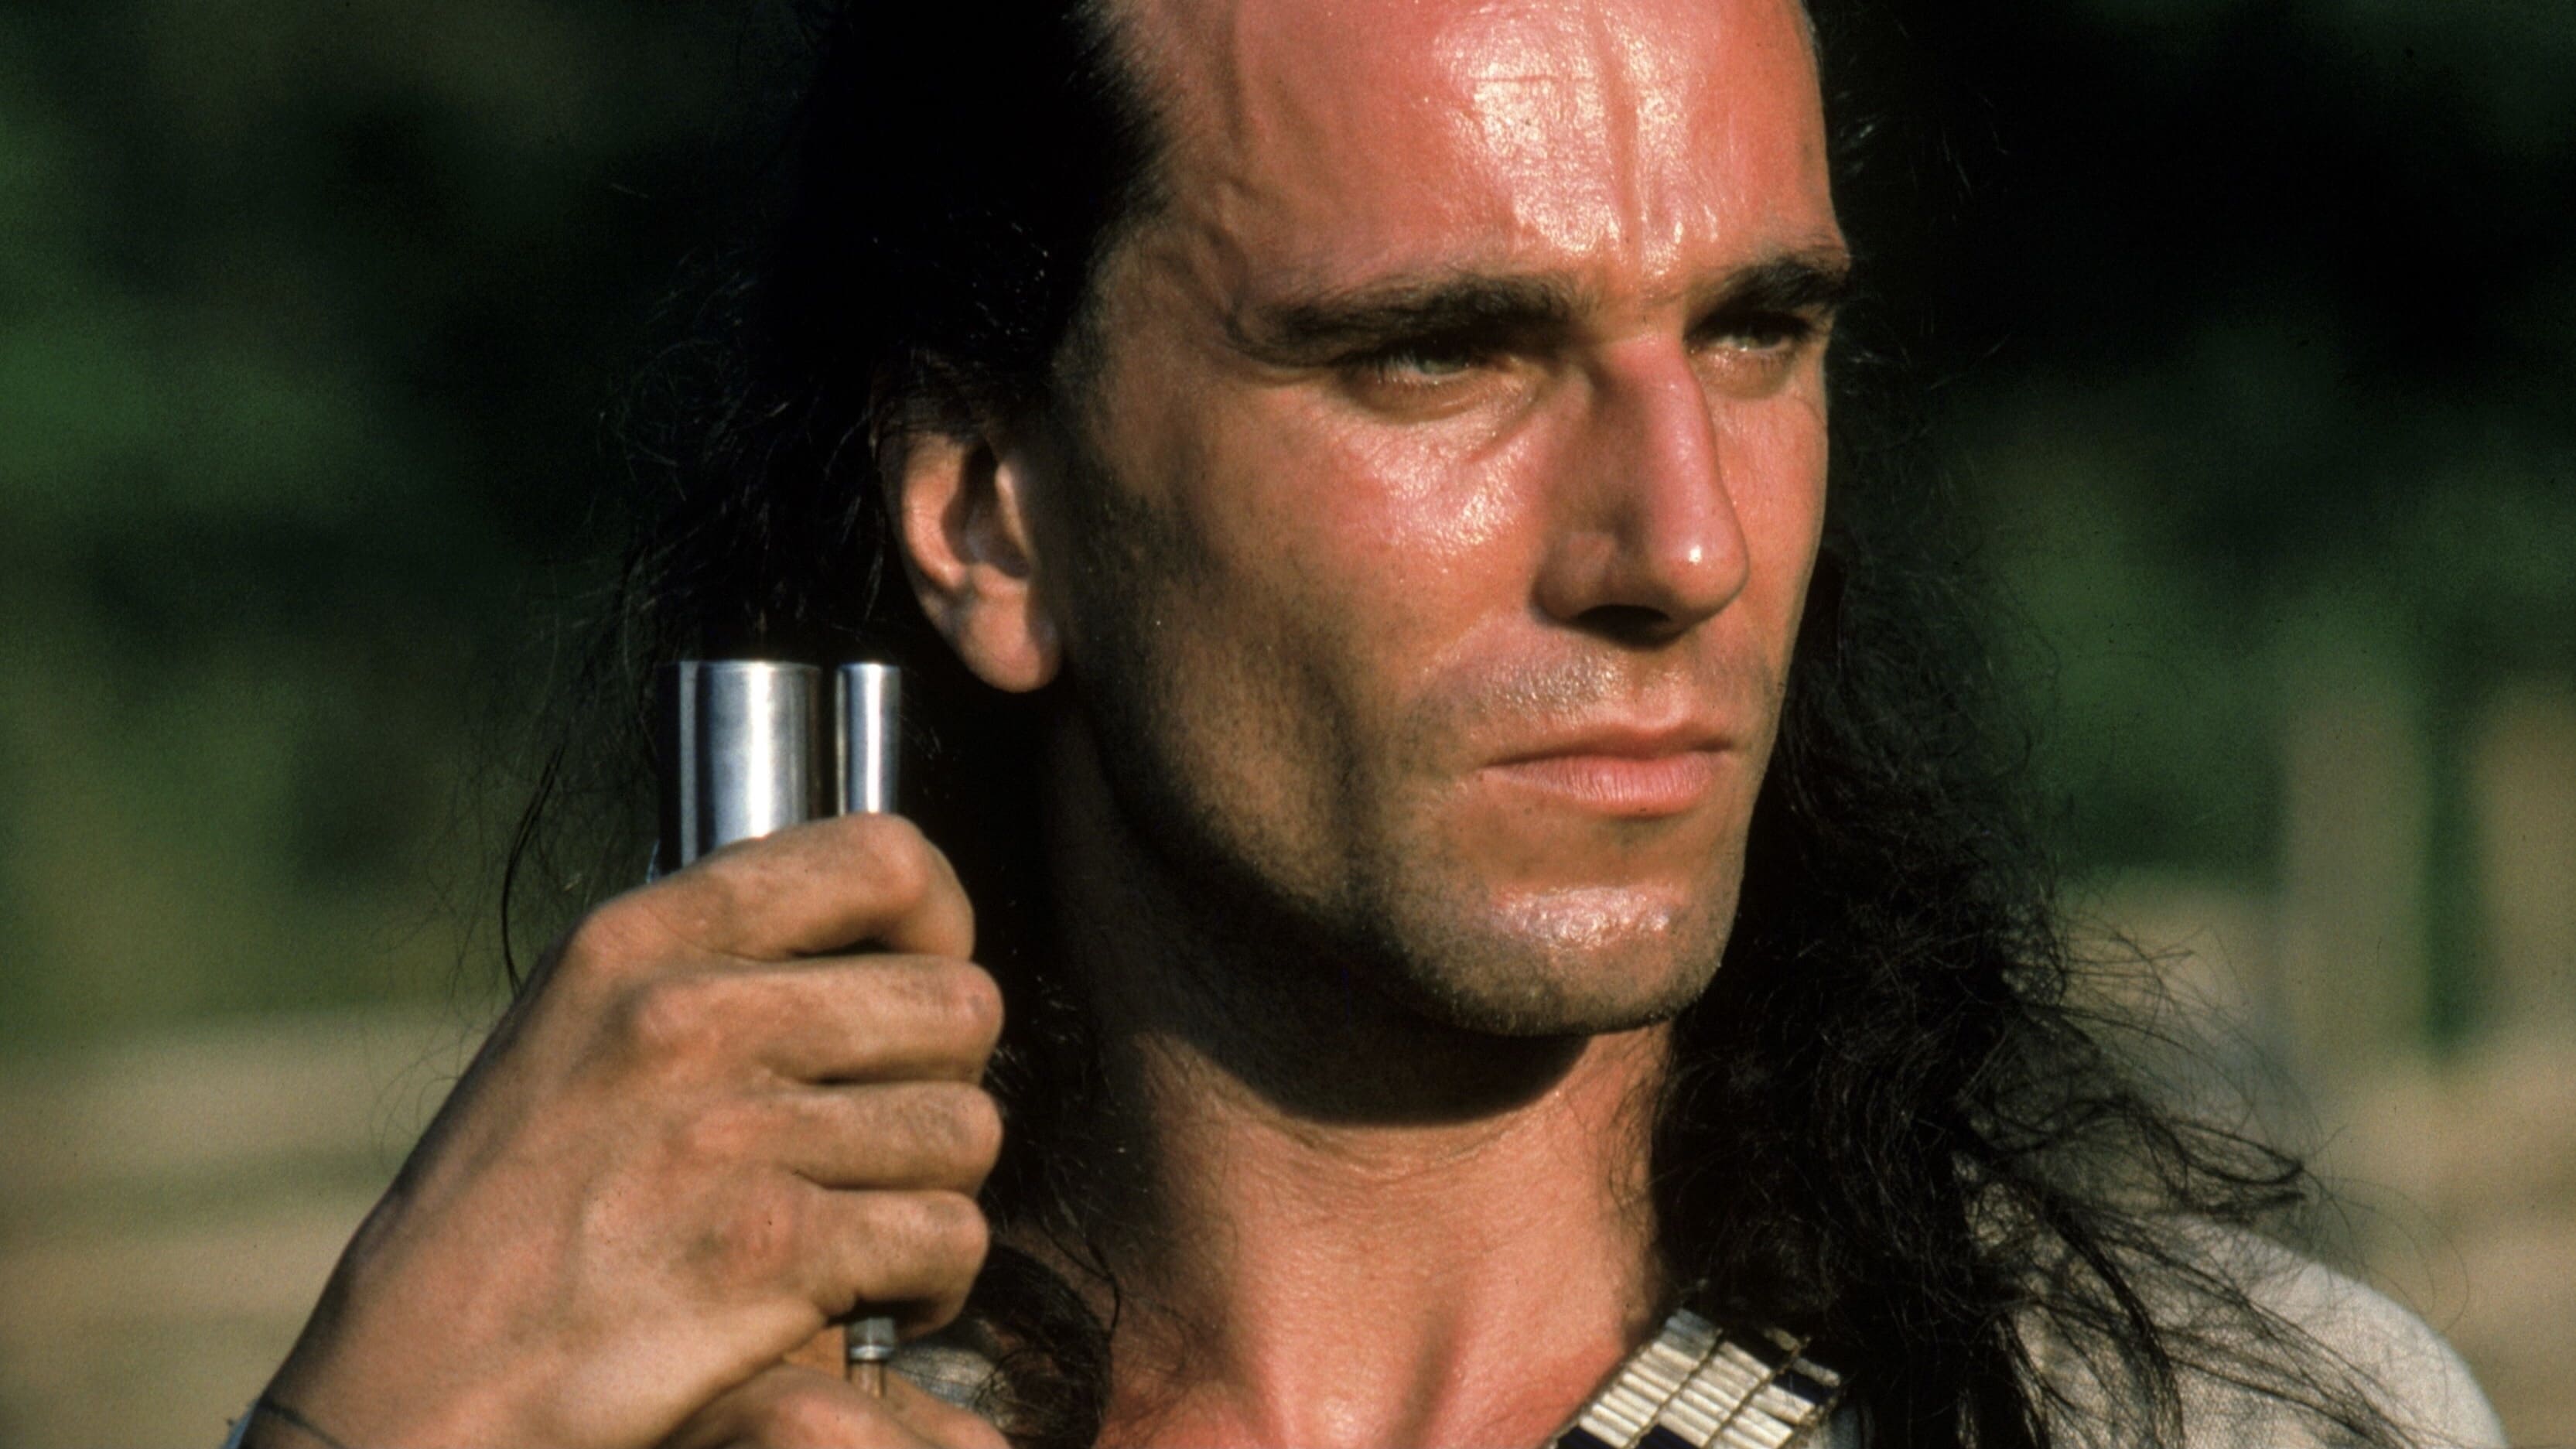 The Last of the Mohicans (1992)